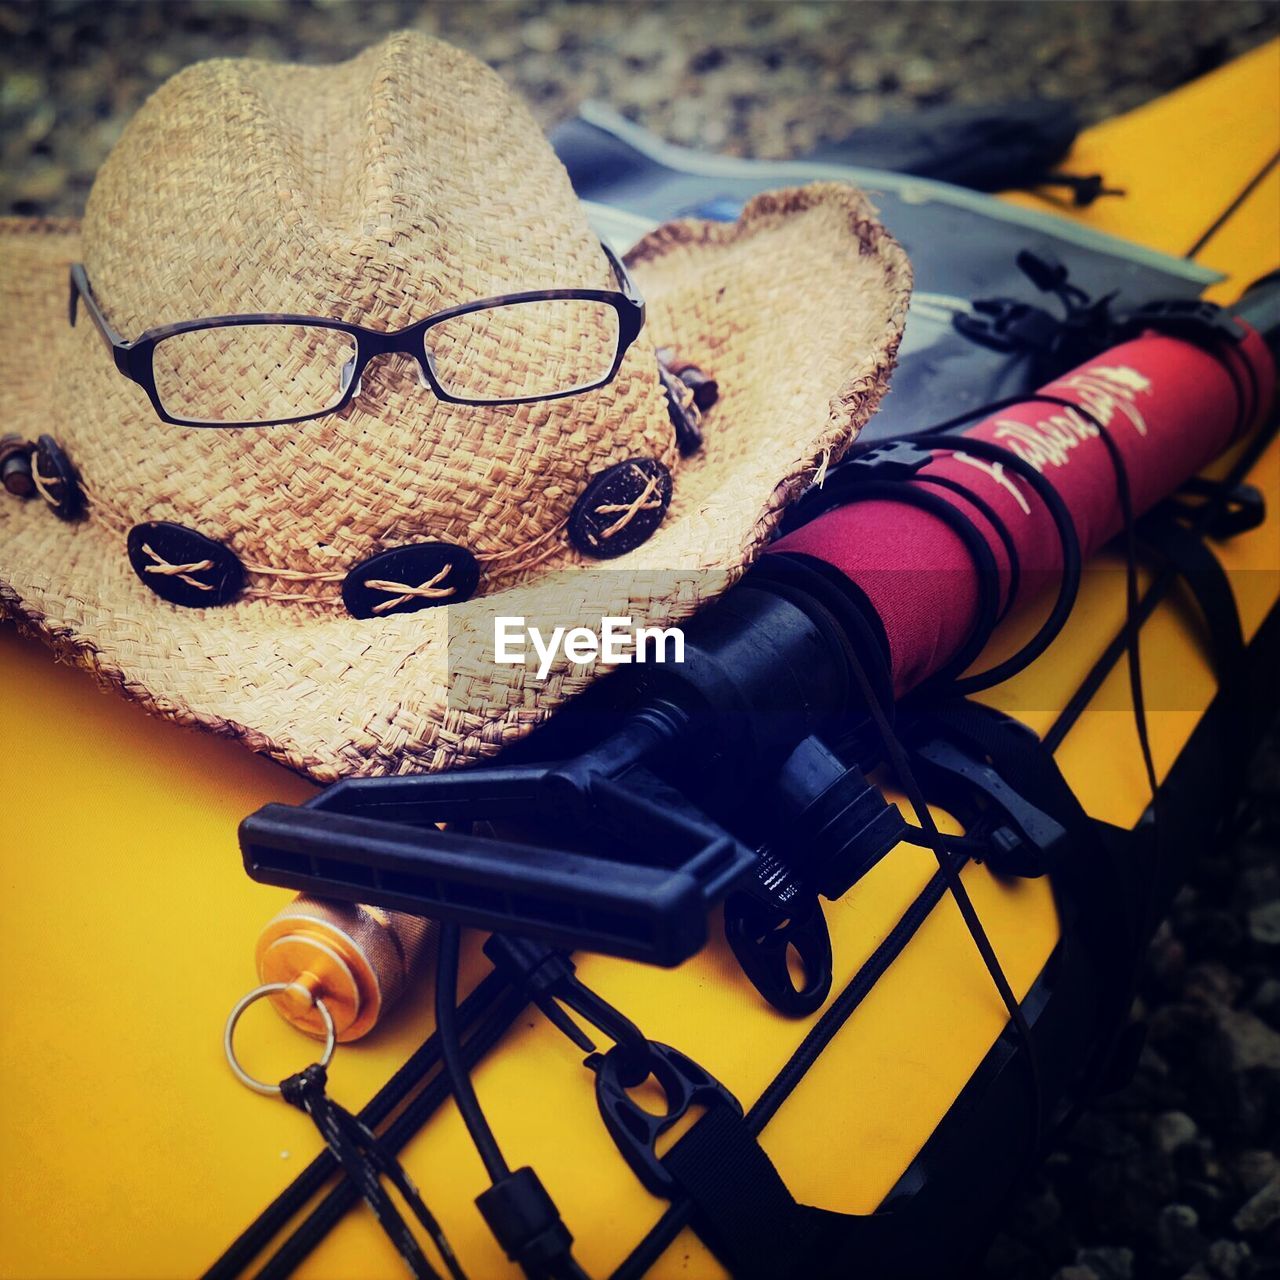 Cropped image of yellow kayak with hat and eyeglasses